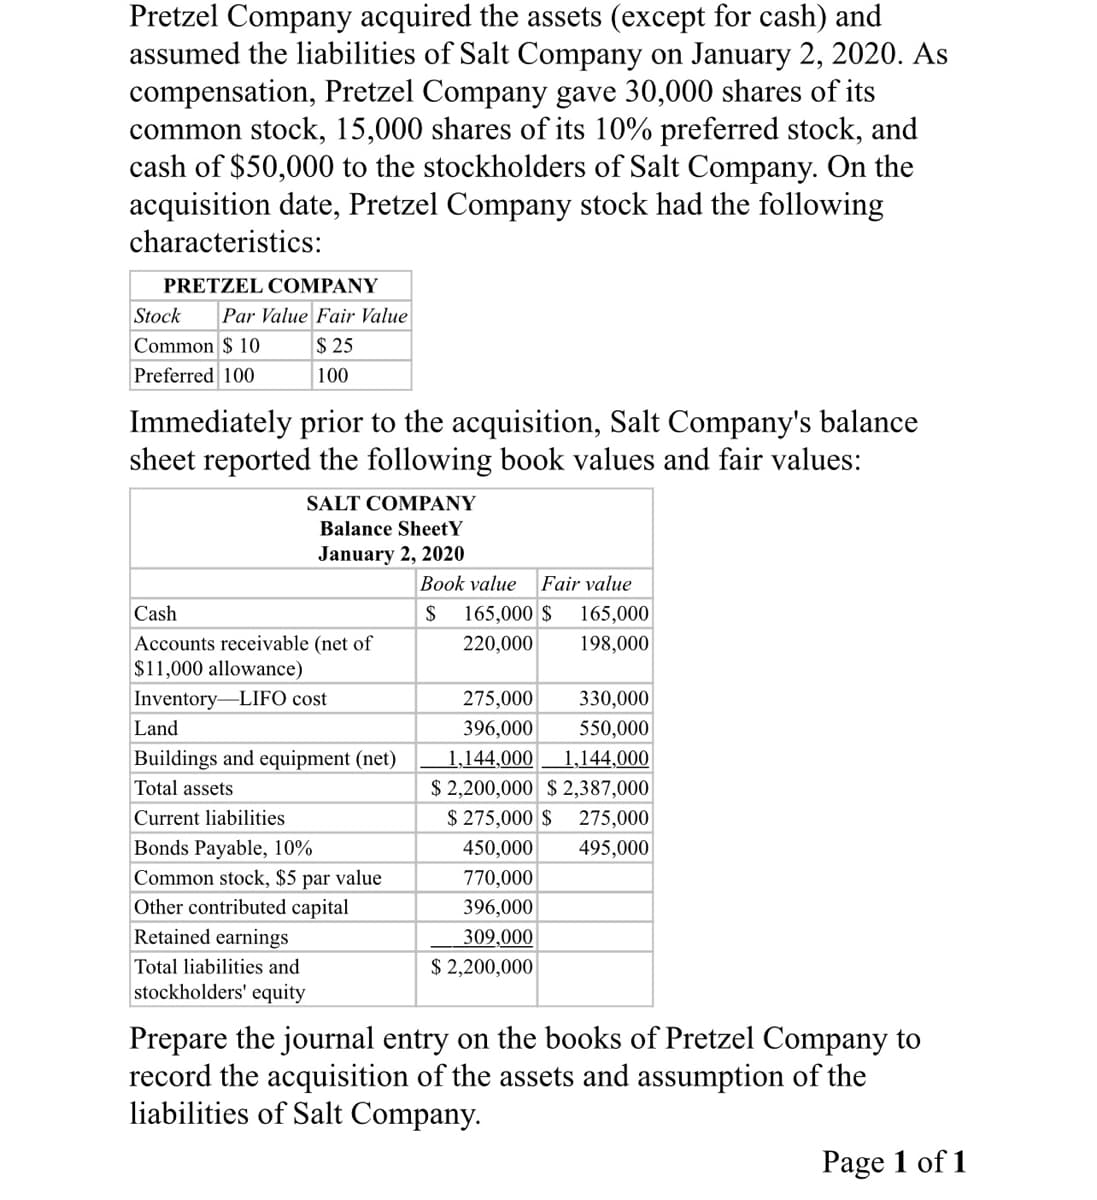 Pretzel Company acquired the assets (except for cash) and
assumed the liabilities of Salt Company on January 2, 2020. As
compensation, Pretzel Company gave 30,000 shares of its
common stock, 15,000 shares of its 10% preferred stock, and
cash of $50,000 to the stockholders of Salt Company. On the
acquisition date, Pretzel Company stock had the following
characteristics:
PRETZEL COMPANY
Stock
Par Value Fair Value
Common $ 10
$ 25
Preferred 100
100
Immediately prior to the acquisition, Salt Company's balance
sheet reported the following book values and fair values:
SALT COMPANY
Balance SheetY
January 2, 2020
Book value
Fair value
Cash
165,000 $
165,000
Accounts receivable (net of
$11,000 allowance)
220,000
198,000
Inventory-LIFO cost
275,000
330,000
Land
396,000
550,000
Buildings and equipment (net)
1,144,000
1,144,000
$ 2,200,000 $ 2,387,000
$ 275,000 $
Total assets
Current liabilities
275,000
Bonds Payable, 10%
Common stock, $5 par value
450,000
495,000
770,000
Other contributed capital
Retained earnings
396,000
309,000
Total liabilities and
$ 2,200,000
stockholders' equity
Prepare the journal entry on the books of Pretzel Company to
record the acquisition of the assets and assumption of the
liabilities of Salt Company.
Page 1 of 1
